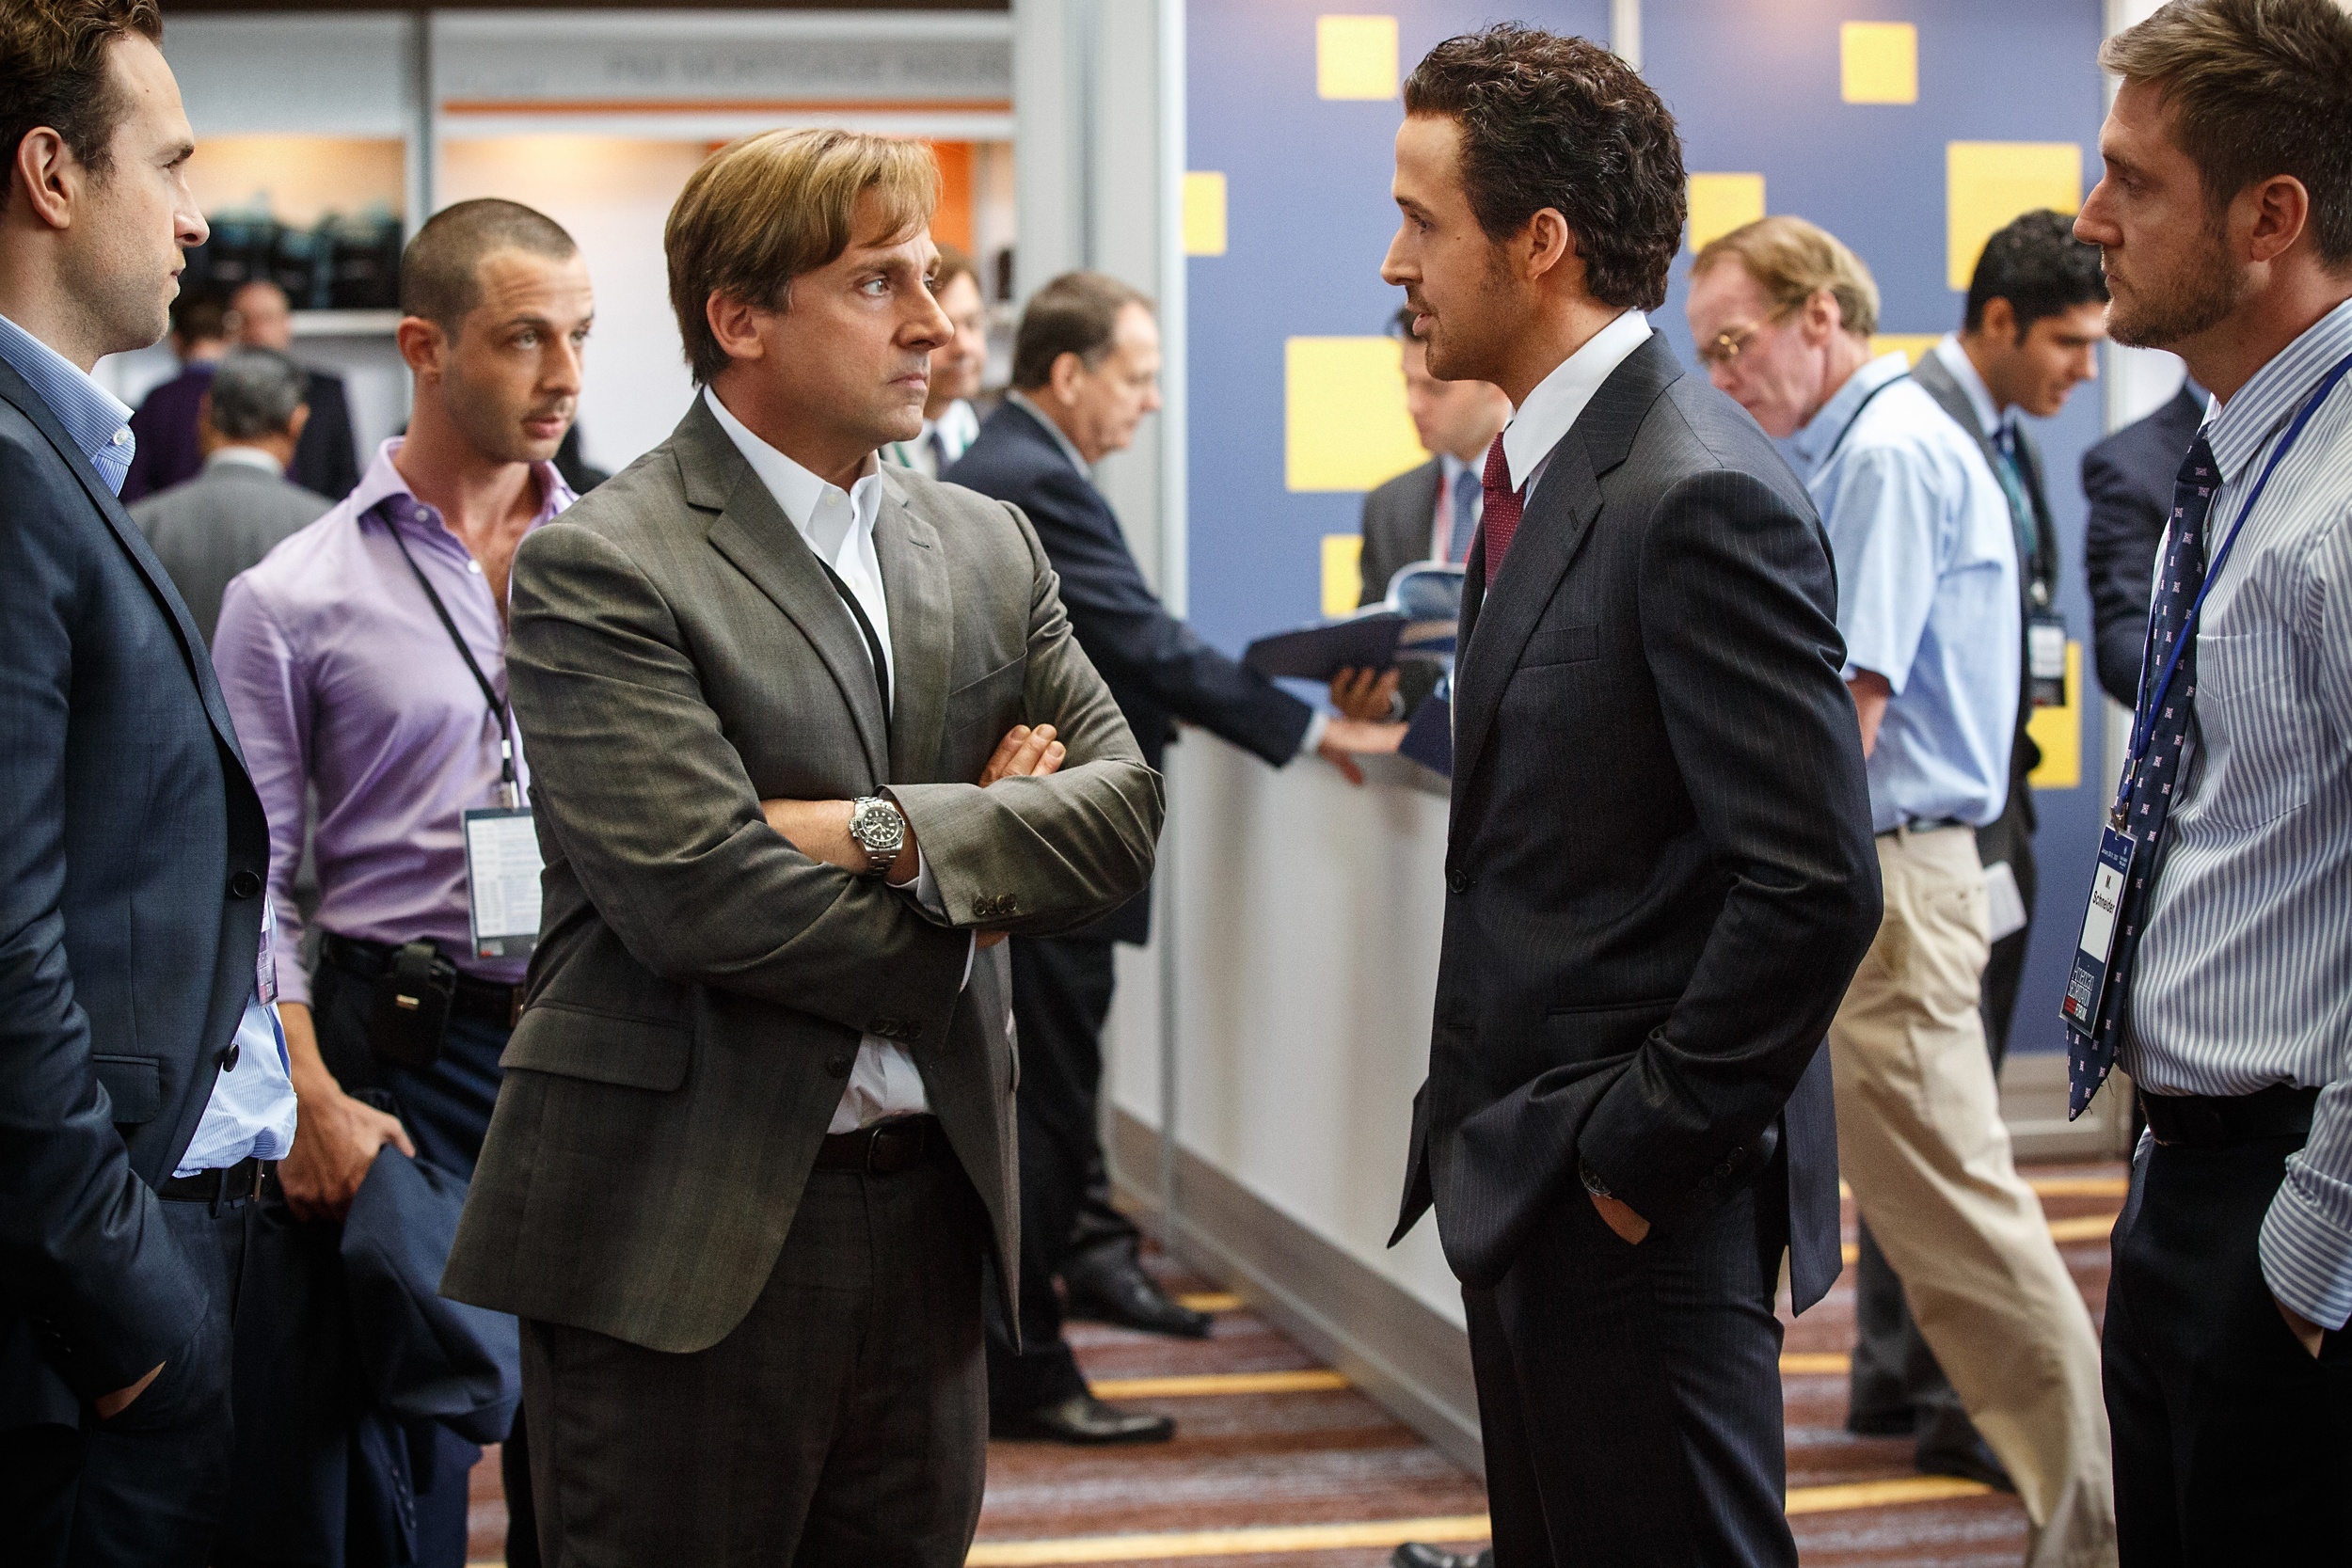 <p><em>The Big Short</em> is the perfect movie for finance bros who love stellar casts. Starring Ryan Gosling, Christian Bale, Steve Carell, and Brad Pitt, this film is about the ‘07-'08 financial crisis in the United States. Even if you’re not a finance bro, you’ll probably still like it. </p><p>You may also like: <a href='https://www.yardbarker.com/entertainment/articles/18_of_the_funniest_songs_in_music_history/s1__40239880'>18 of the funniest songs in music history</a></p>